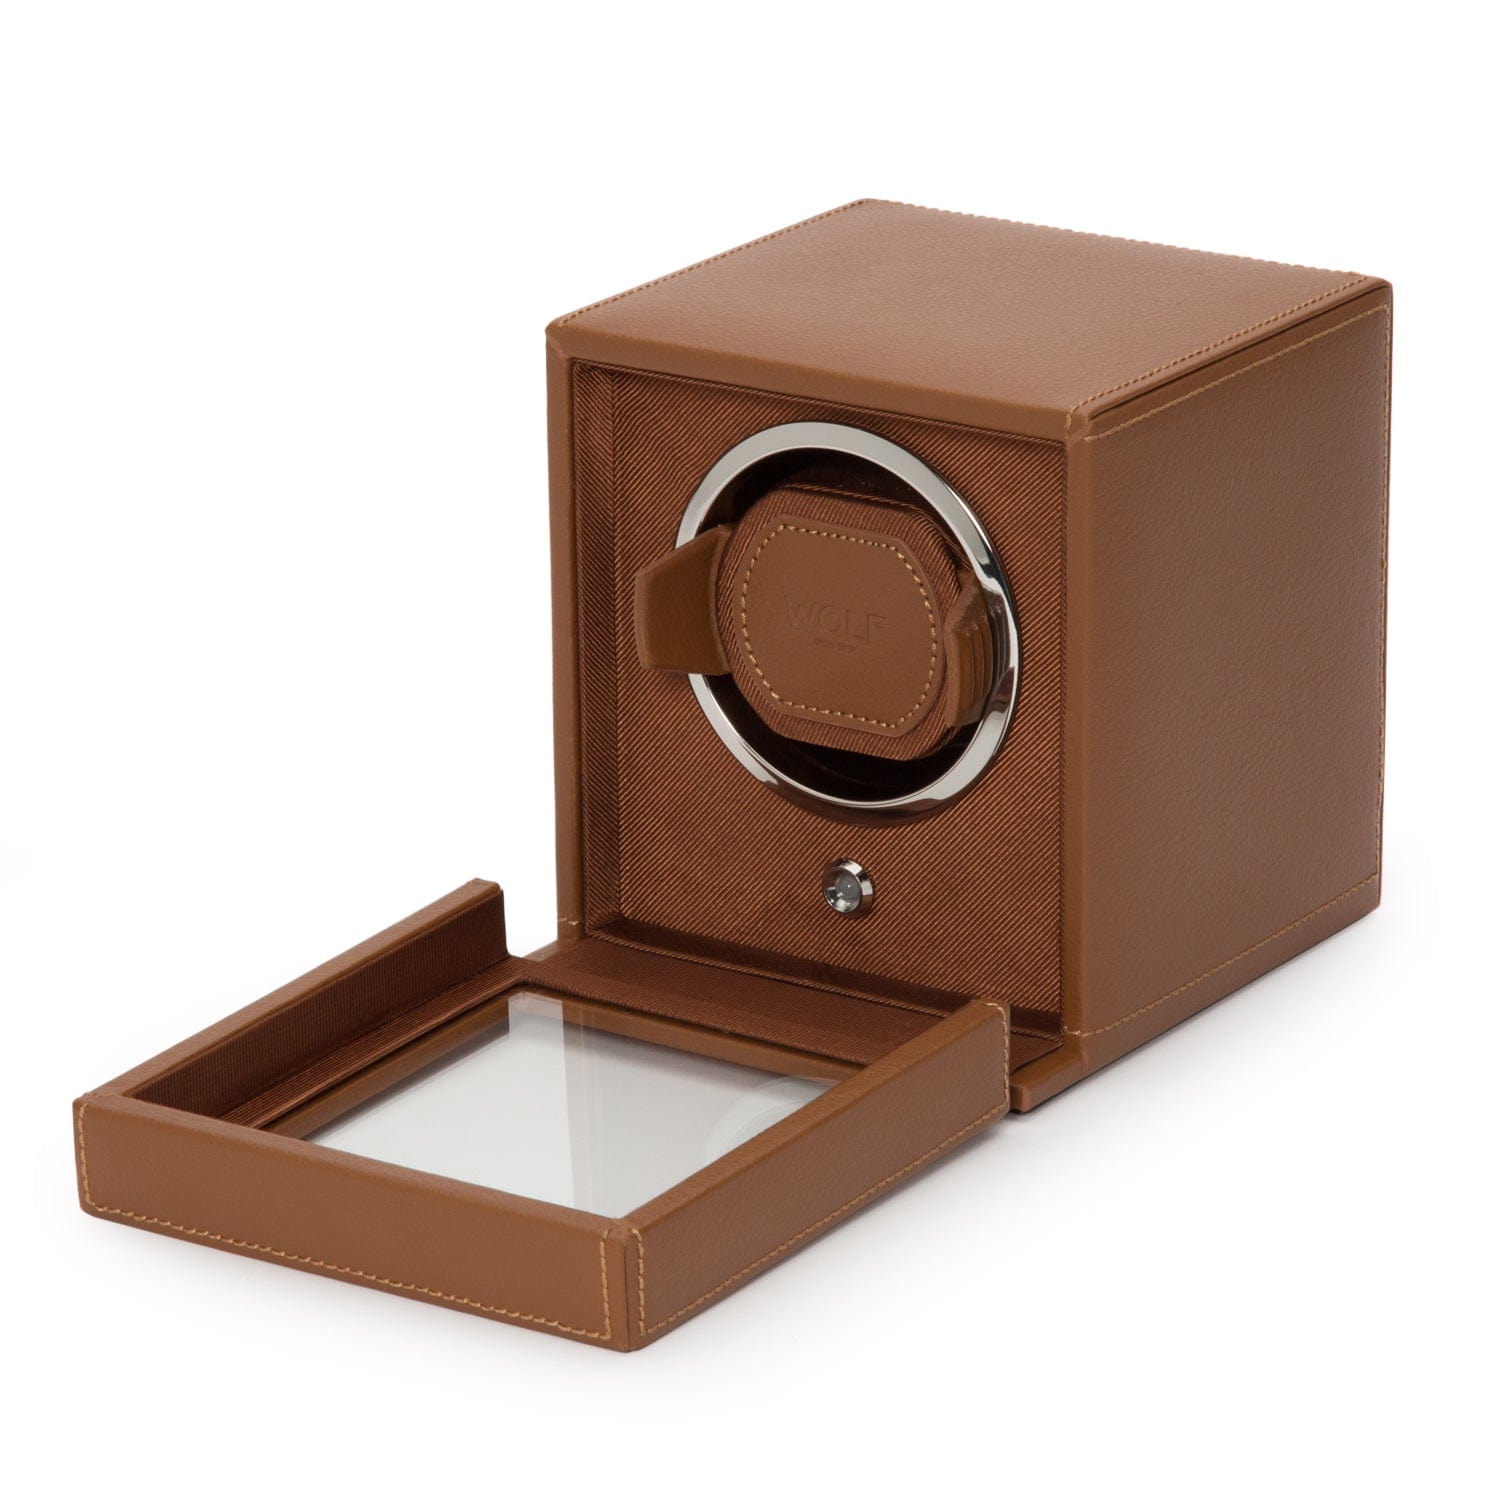 Wolf1834 Watch Winder Cub Single Watch Winder with Cover- Cognac